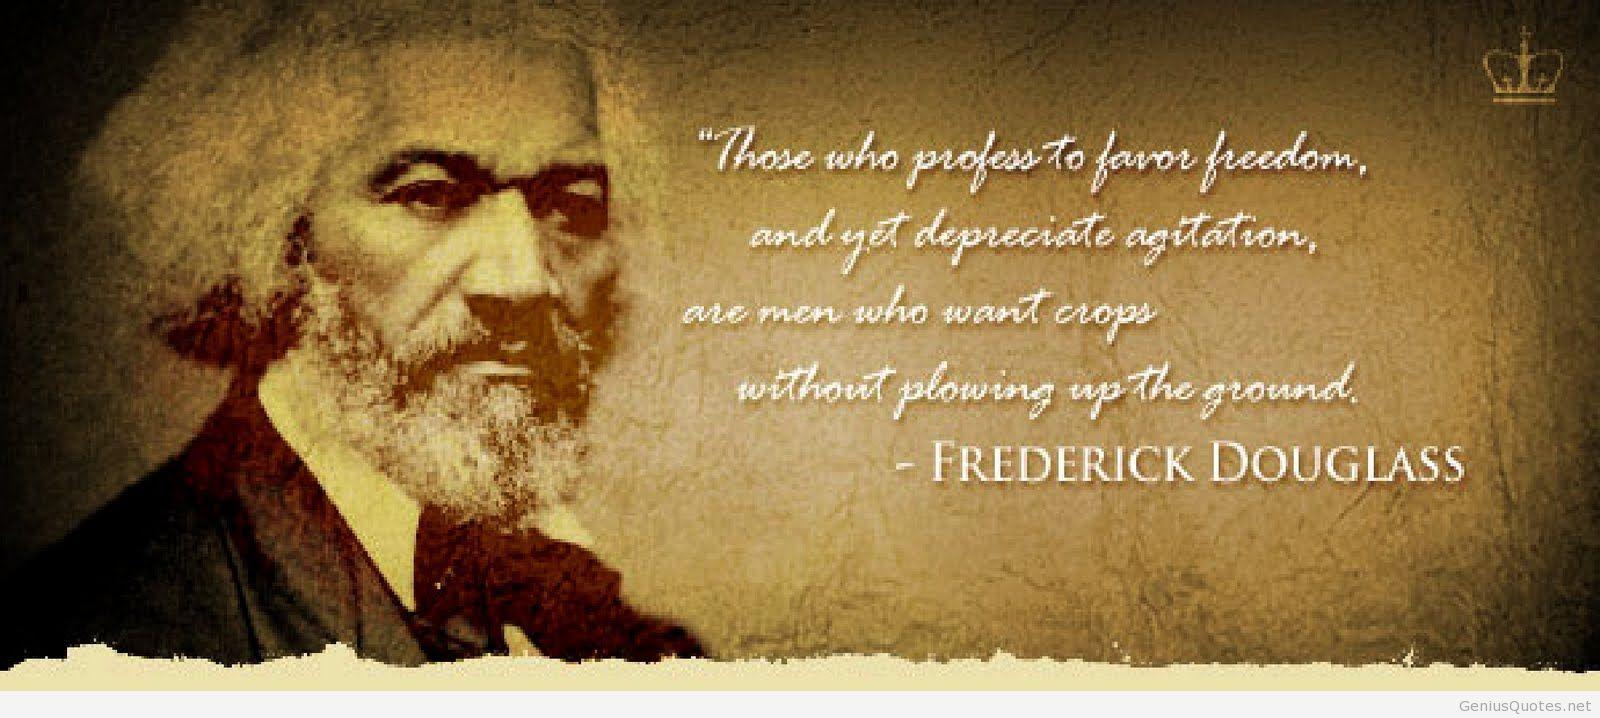 New Frederick Douglass Quotes 39 For Quotes About Love